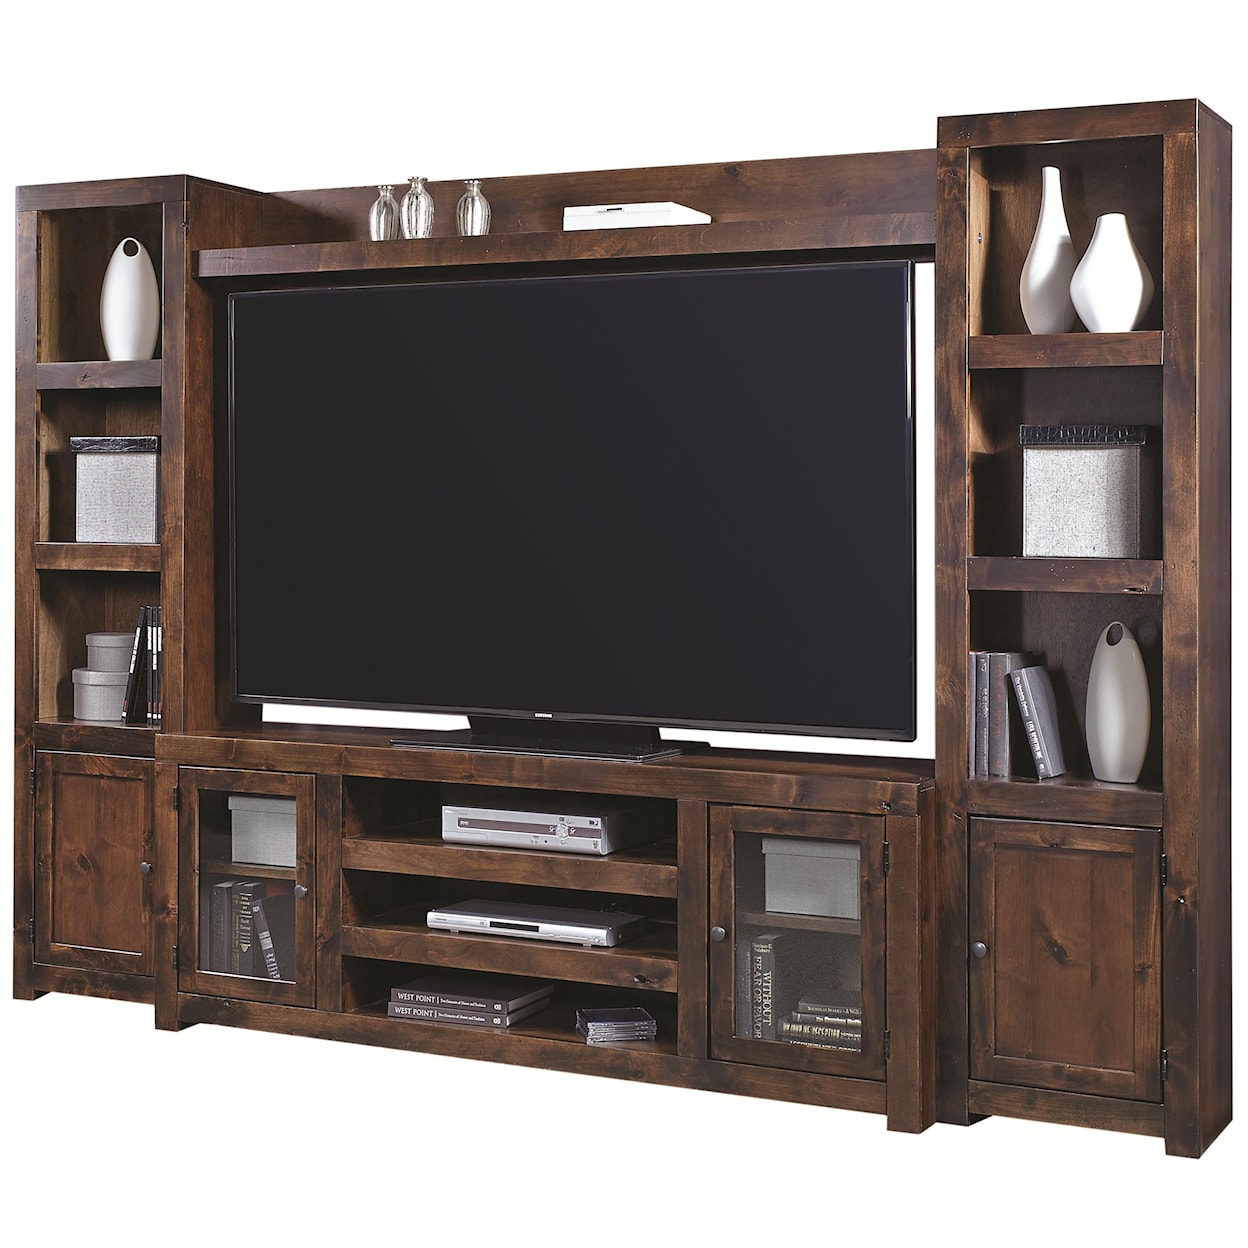 Aspenhome Contemporary Driftwood Entertainment Wall